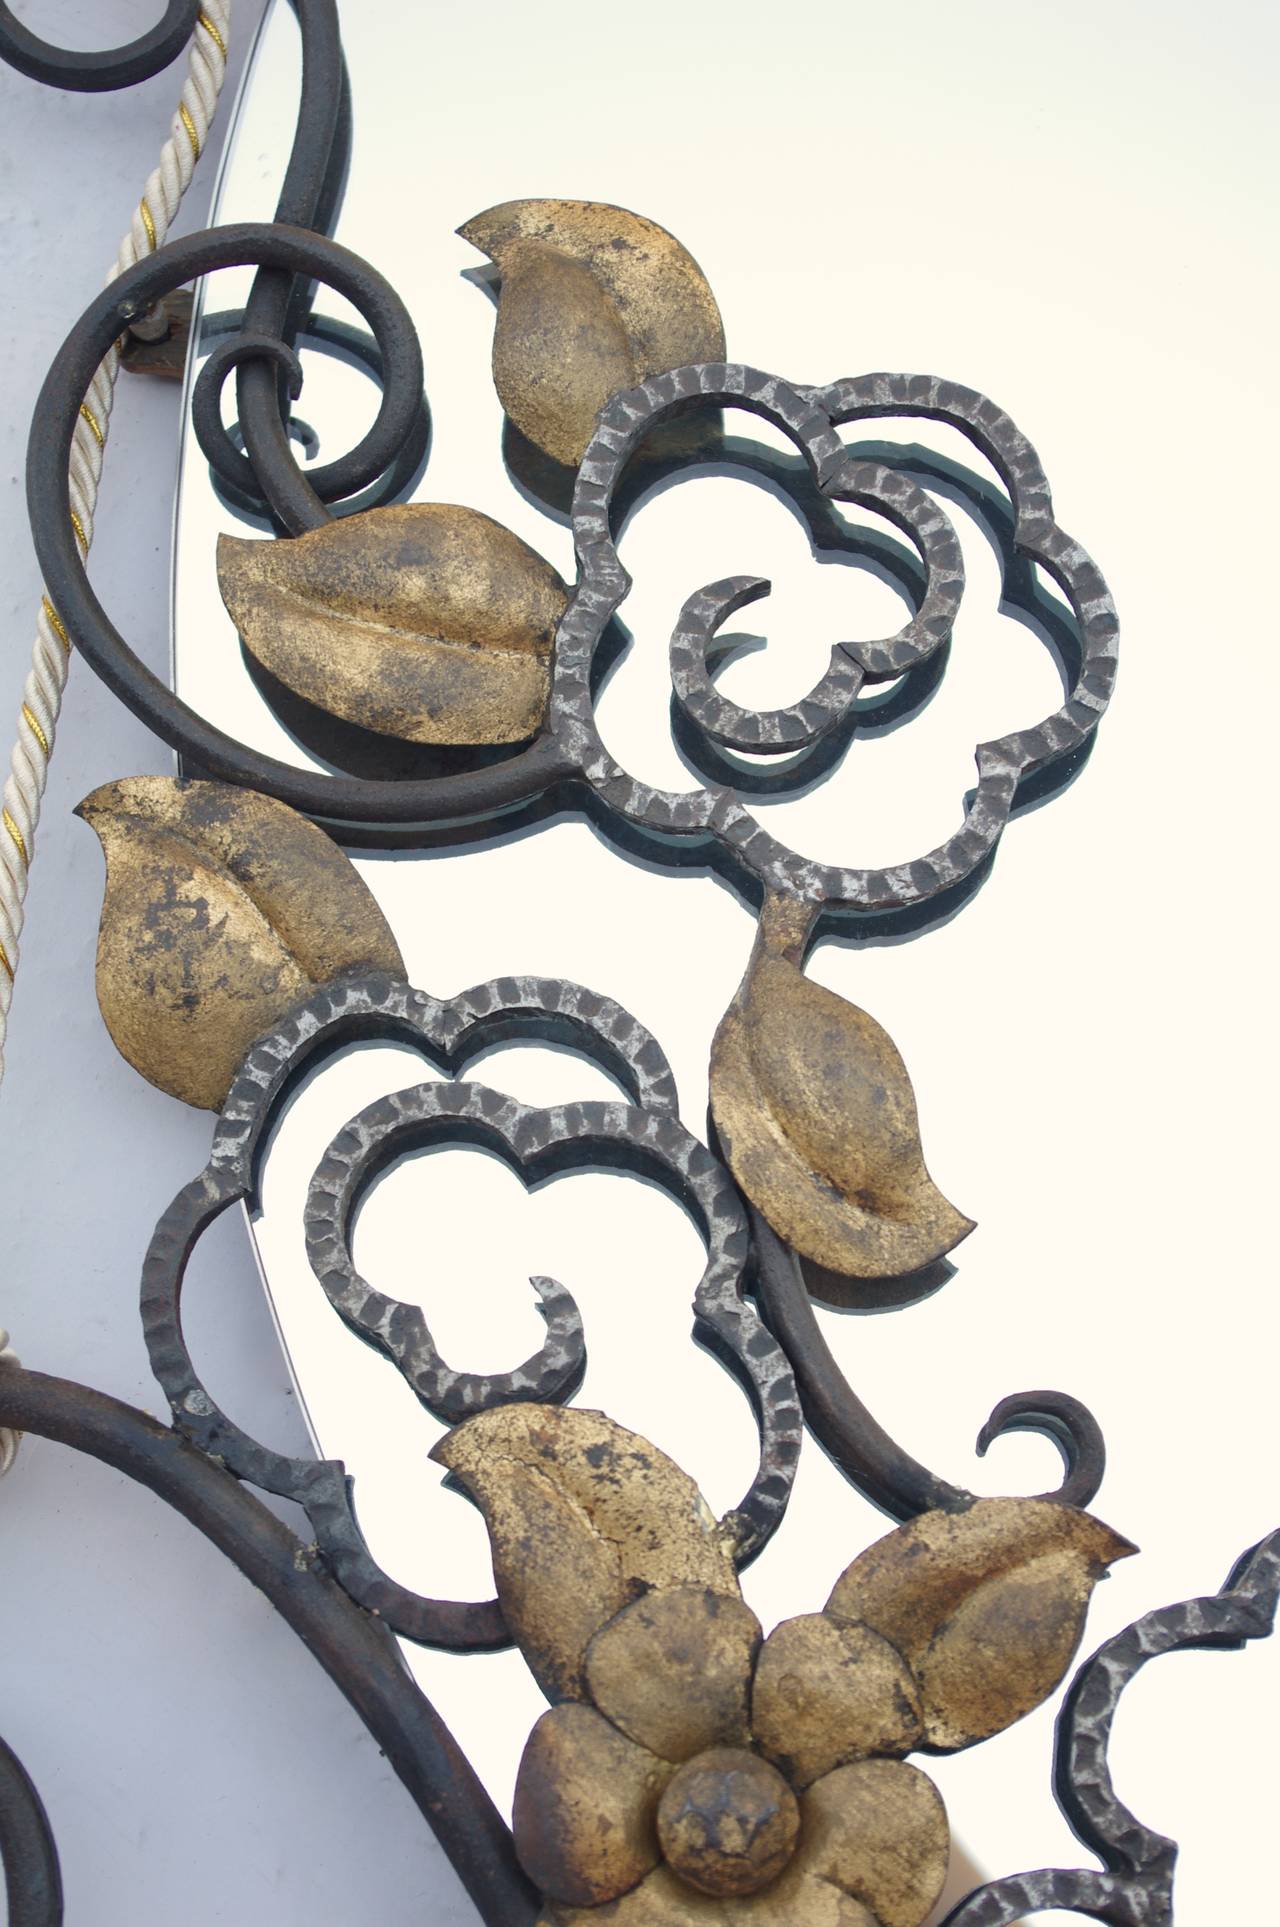 . Wrought iron 
. Circular glass
. Curvy foliage and floral ornaments
. Golden metal
. Two woolen suspension trimmings